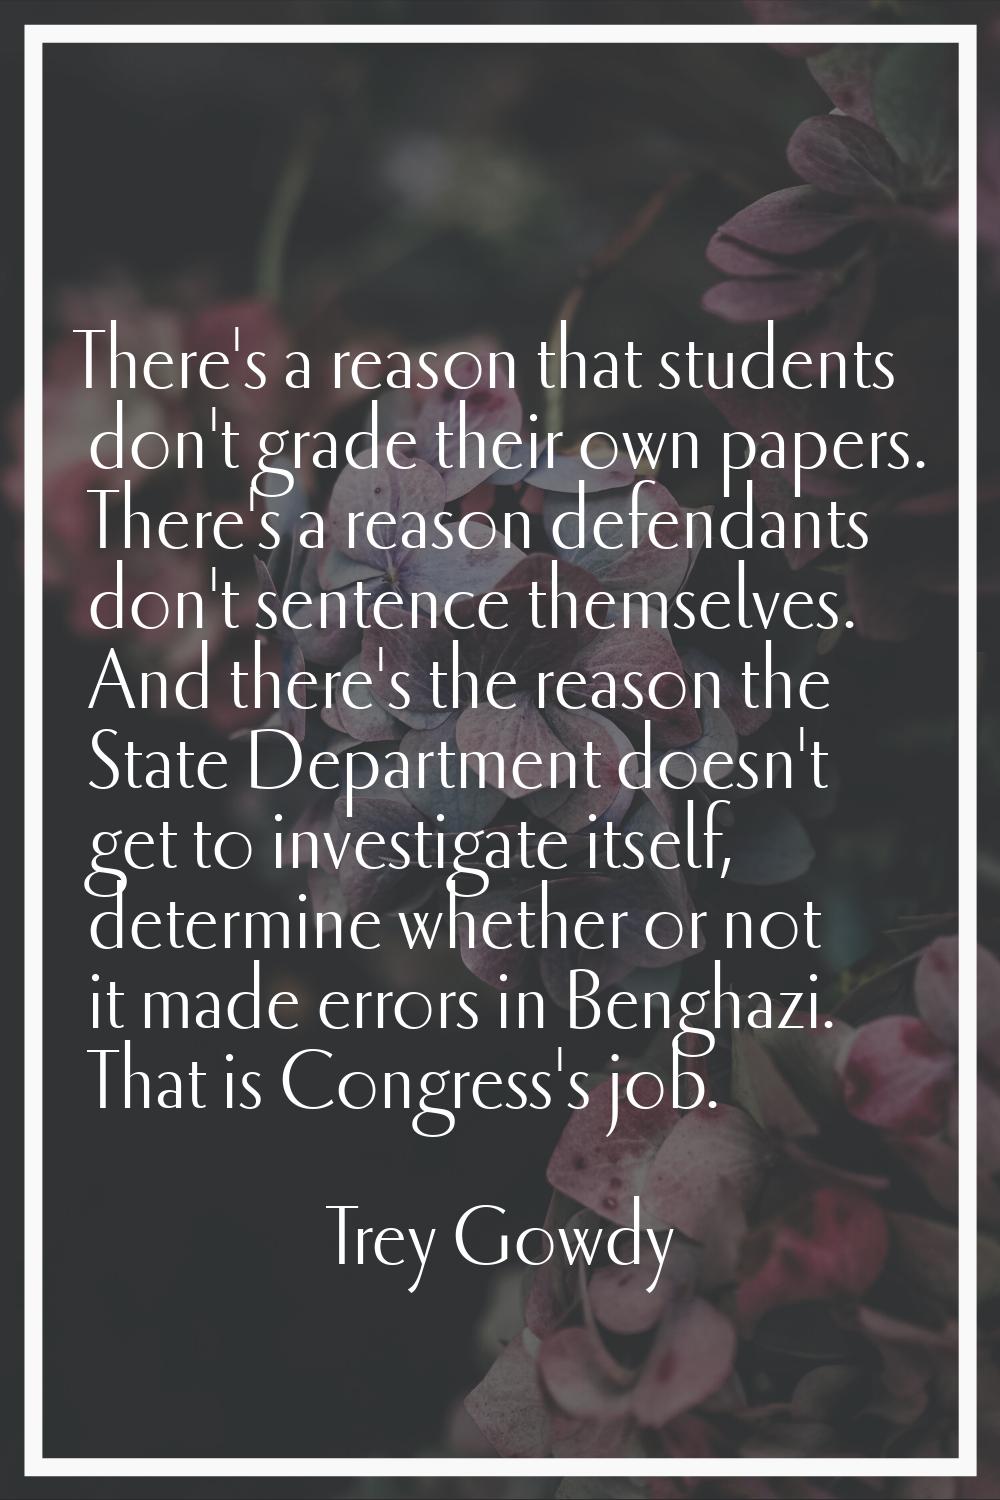 There's a reason that students don't grade their own papers. There's a reason defendants don't sent